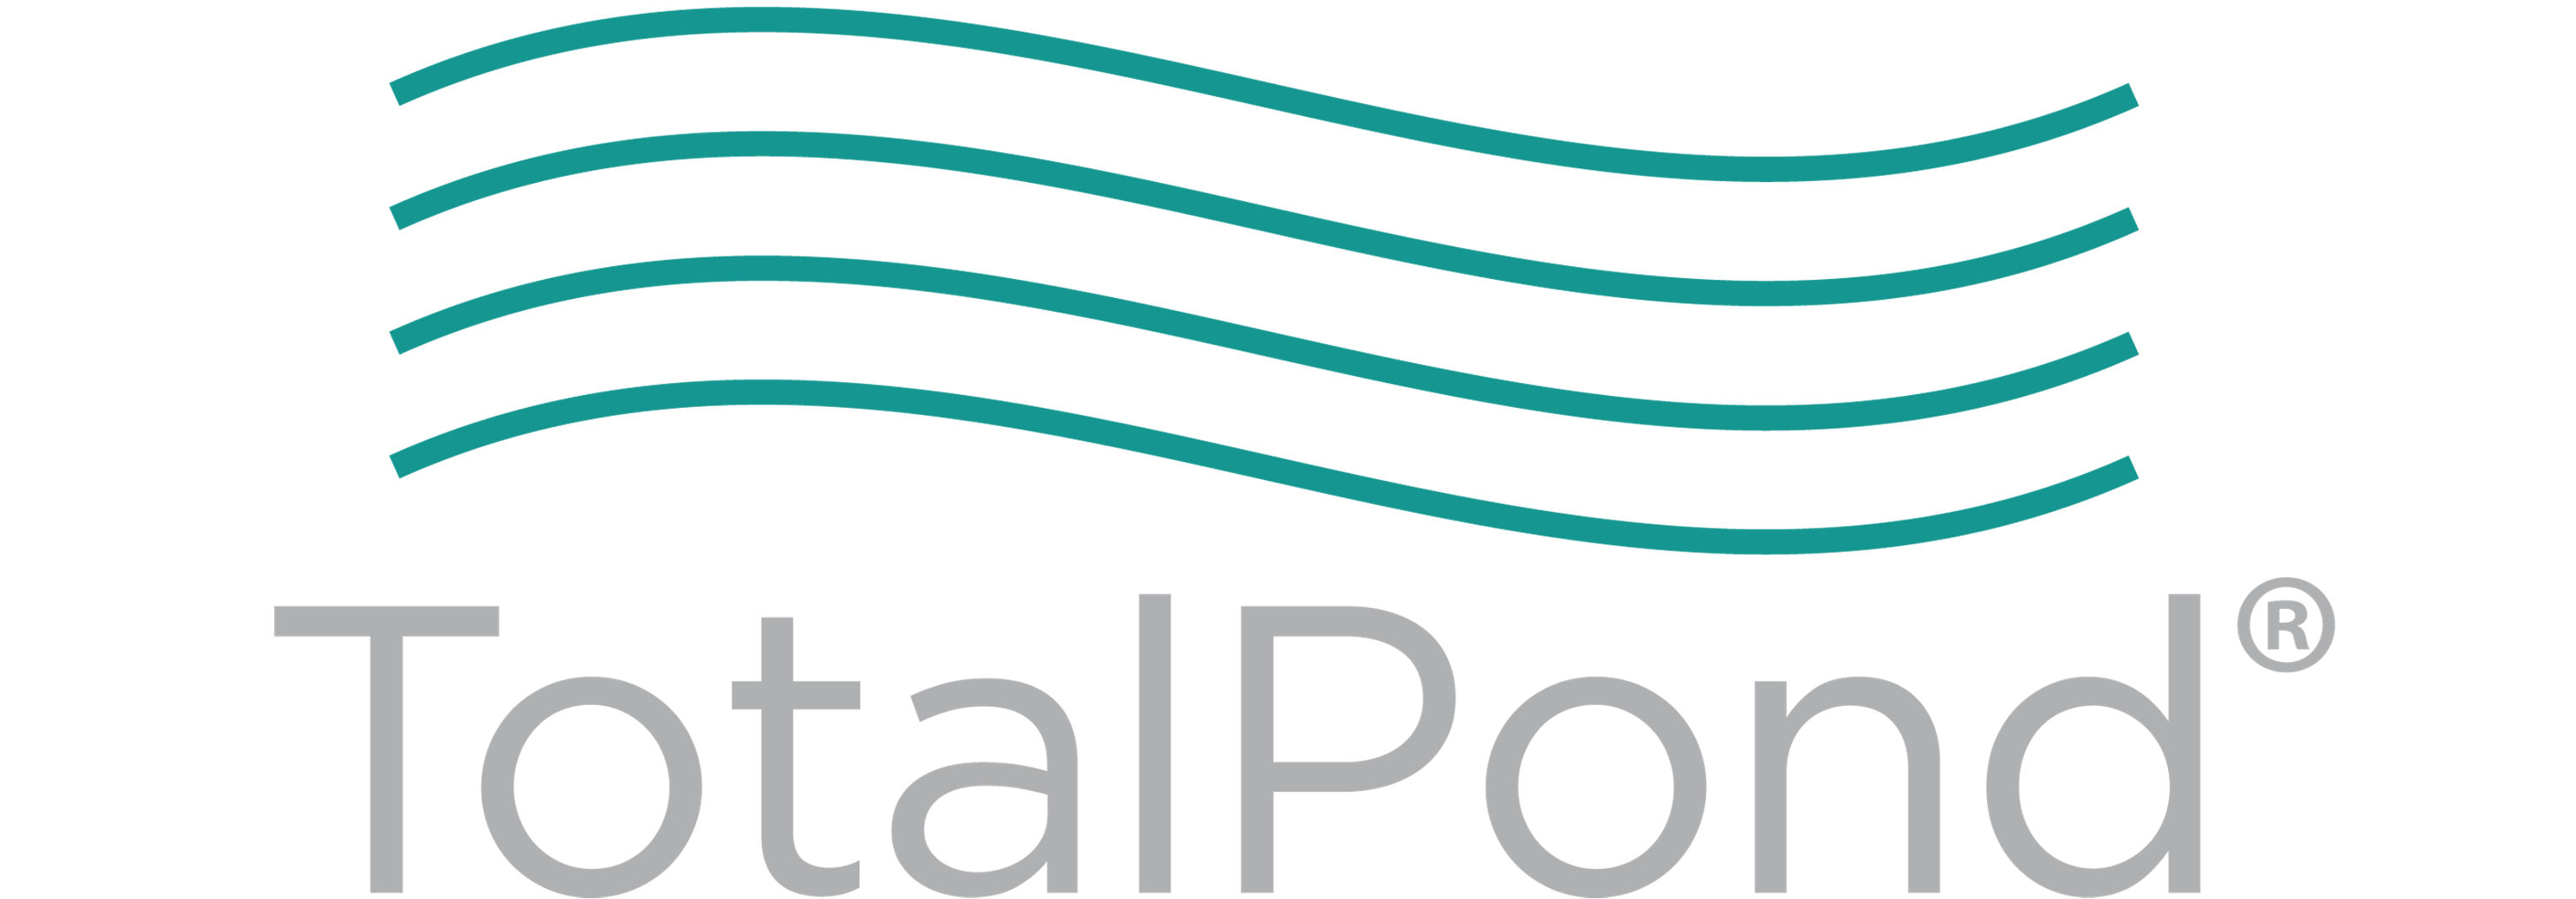 TotalPond logo takes you to our website home page